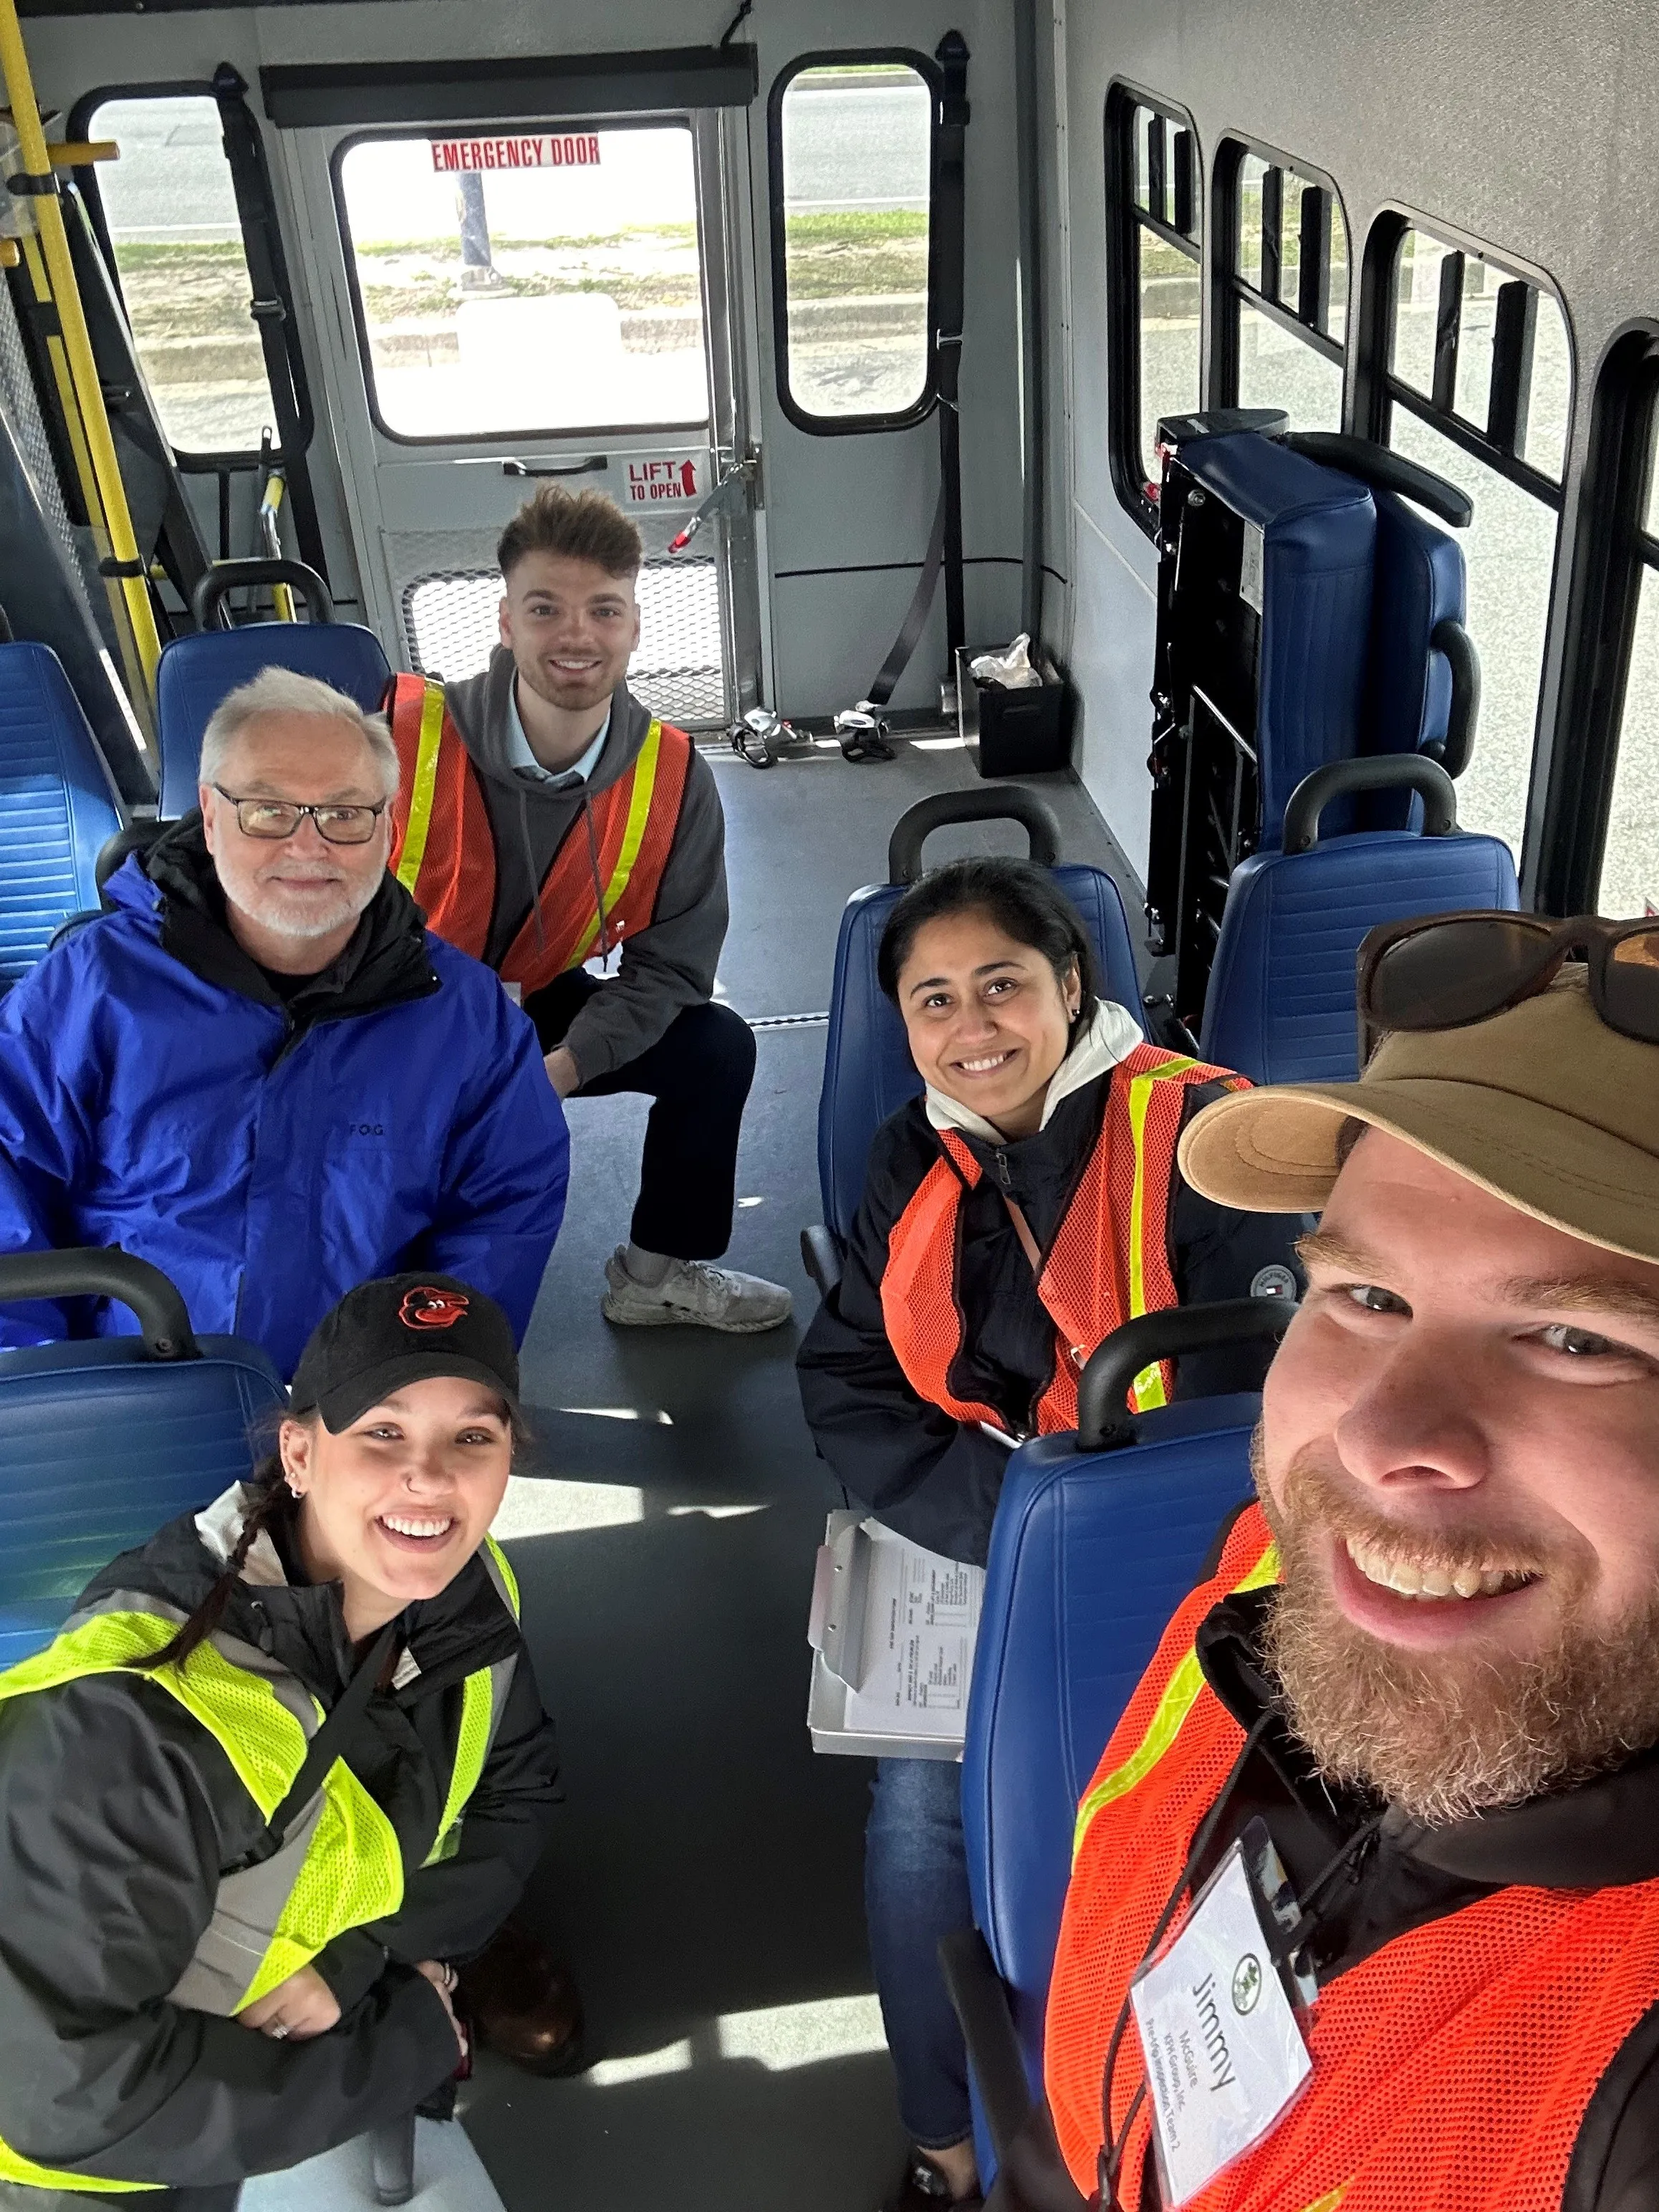 Photo: A group of KFH staff members are seated on a bus at a project site. A few are wearing reflective safety vests and nametags, and carrying clipboards. The point of view is overhead, shot from a camera held at arms' length by Jimmy.